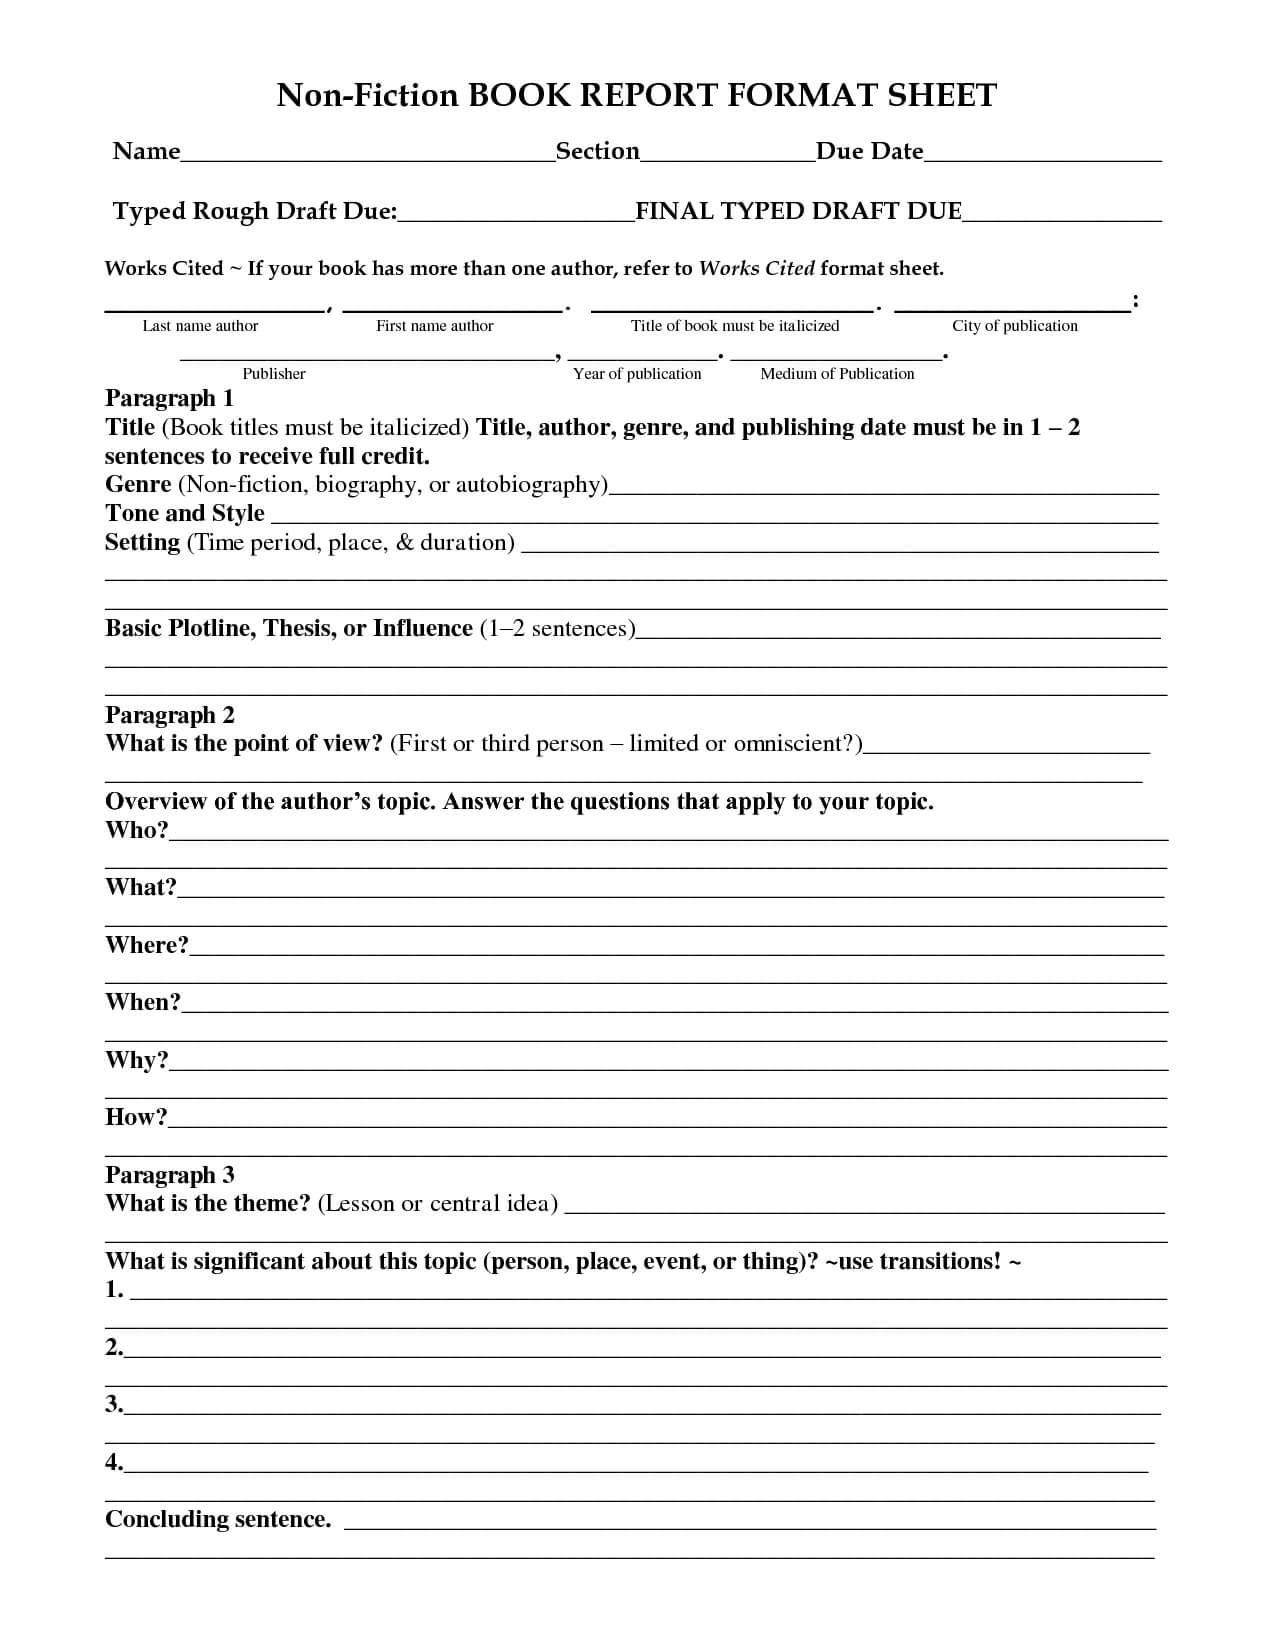 28 Images Of 5Th Grade Non Fiction Book Report Template Regarding Nonfiction Book Report Template